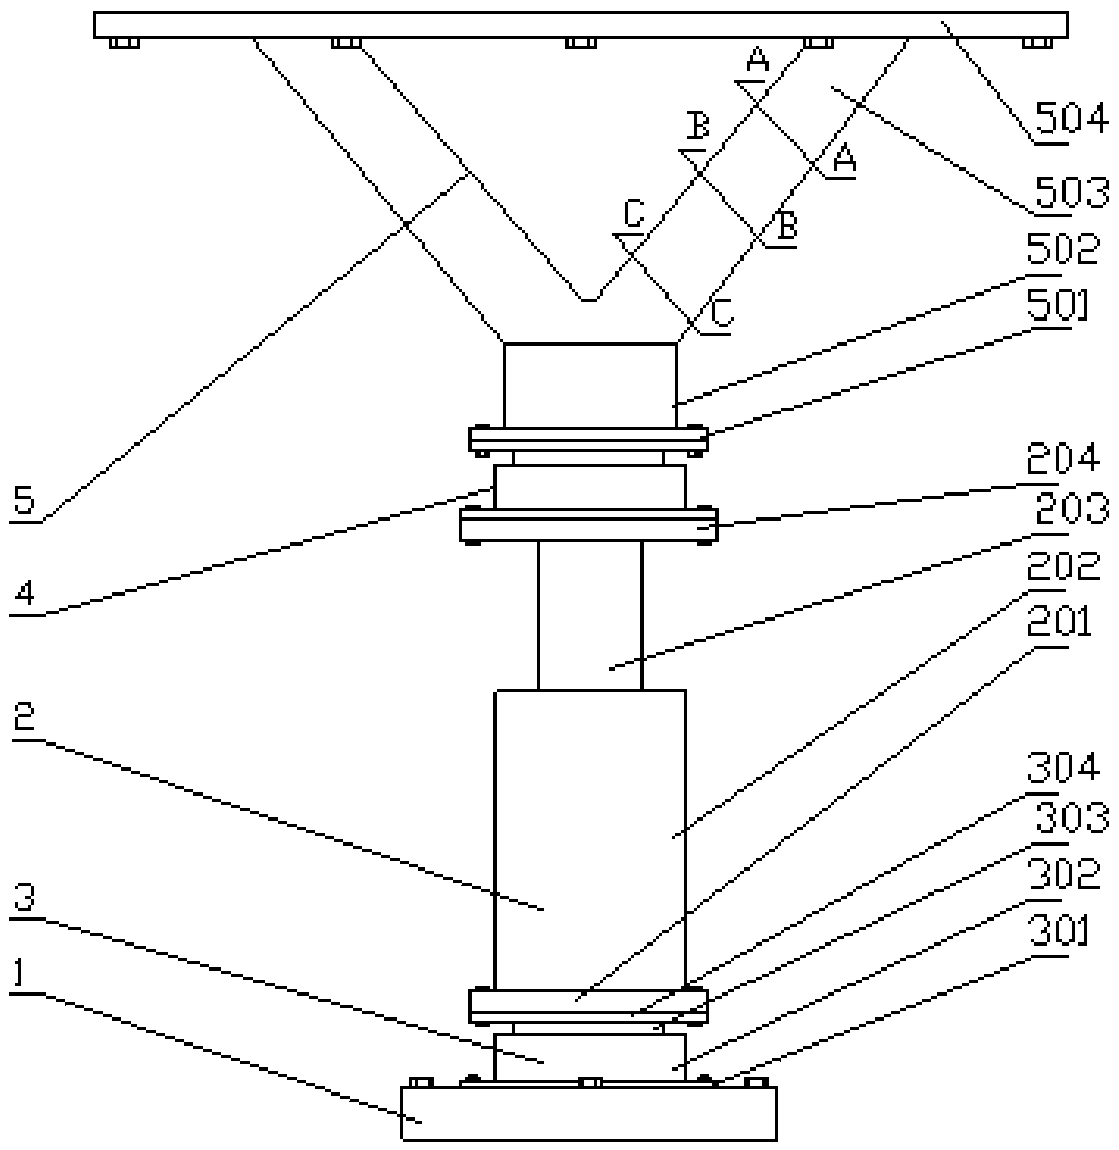 Reinforcing device for repairing buildings